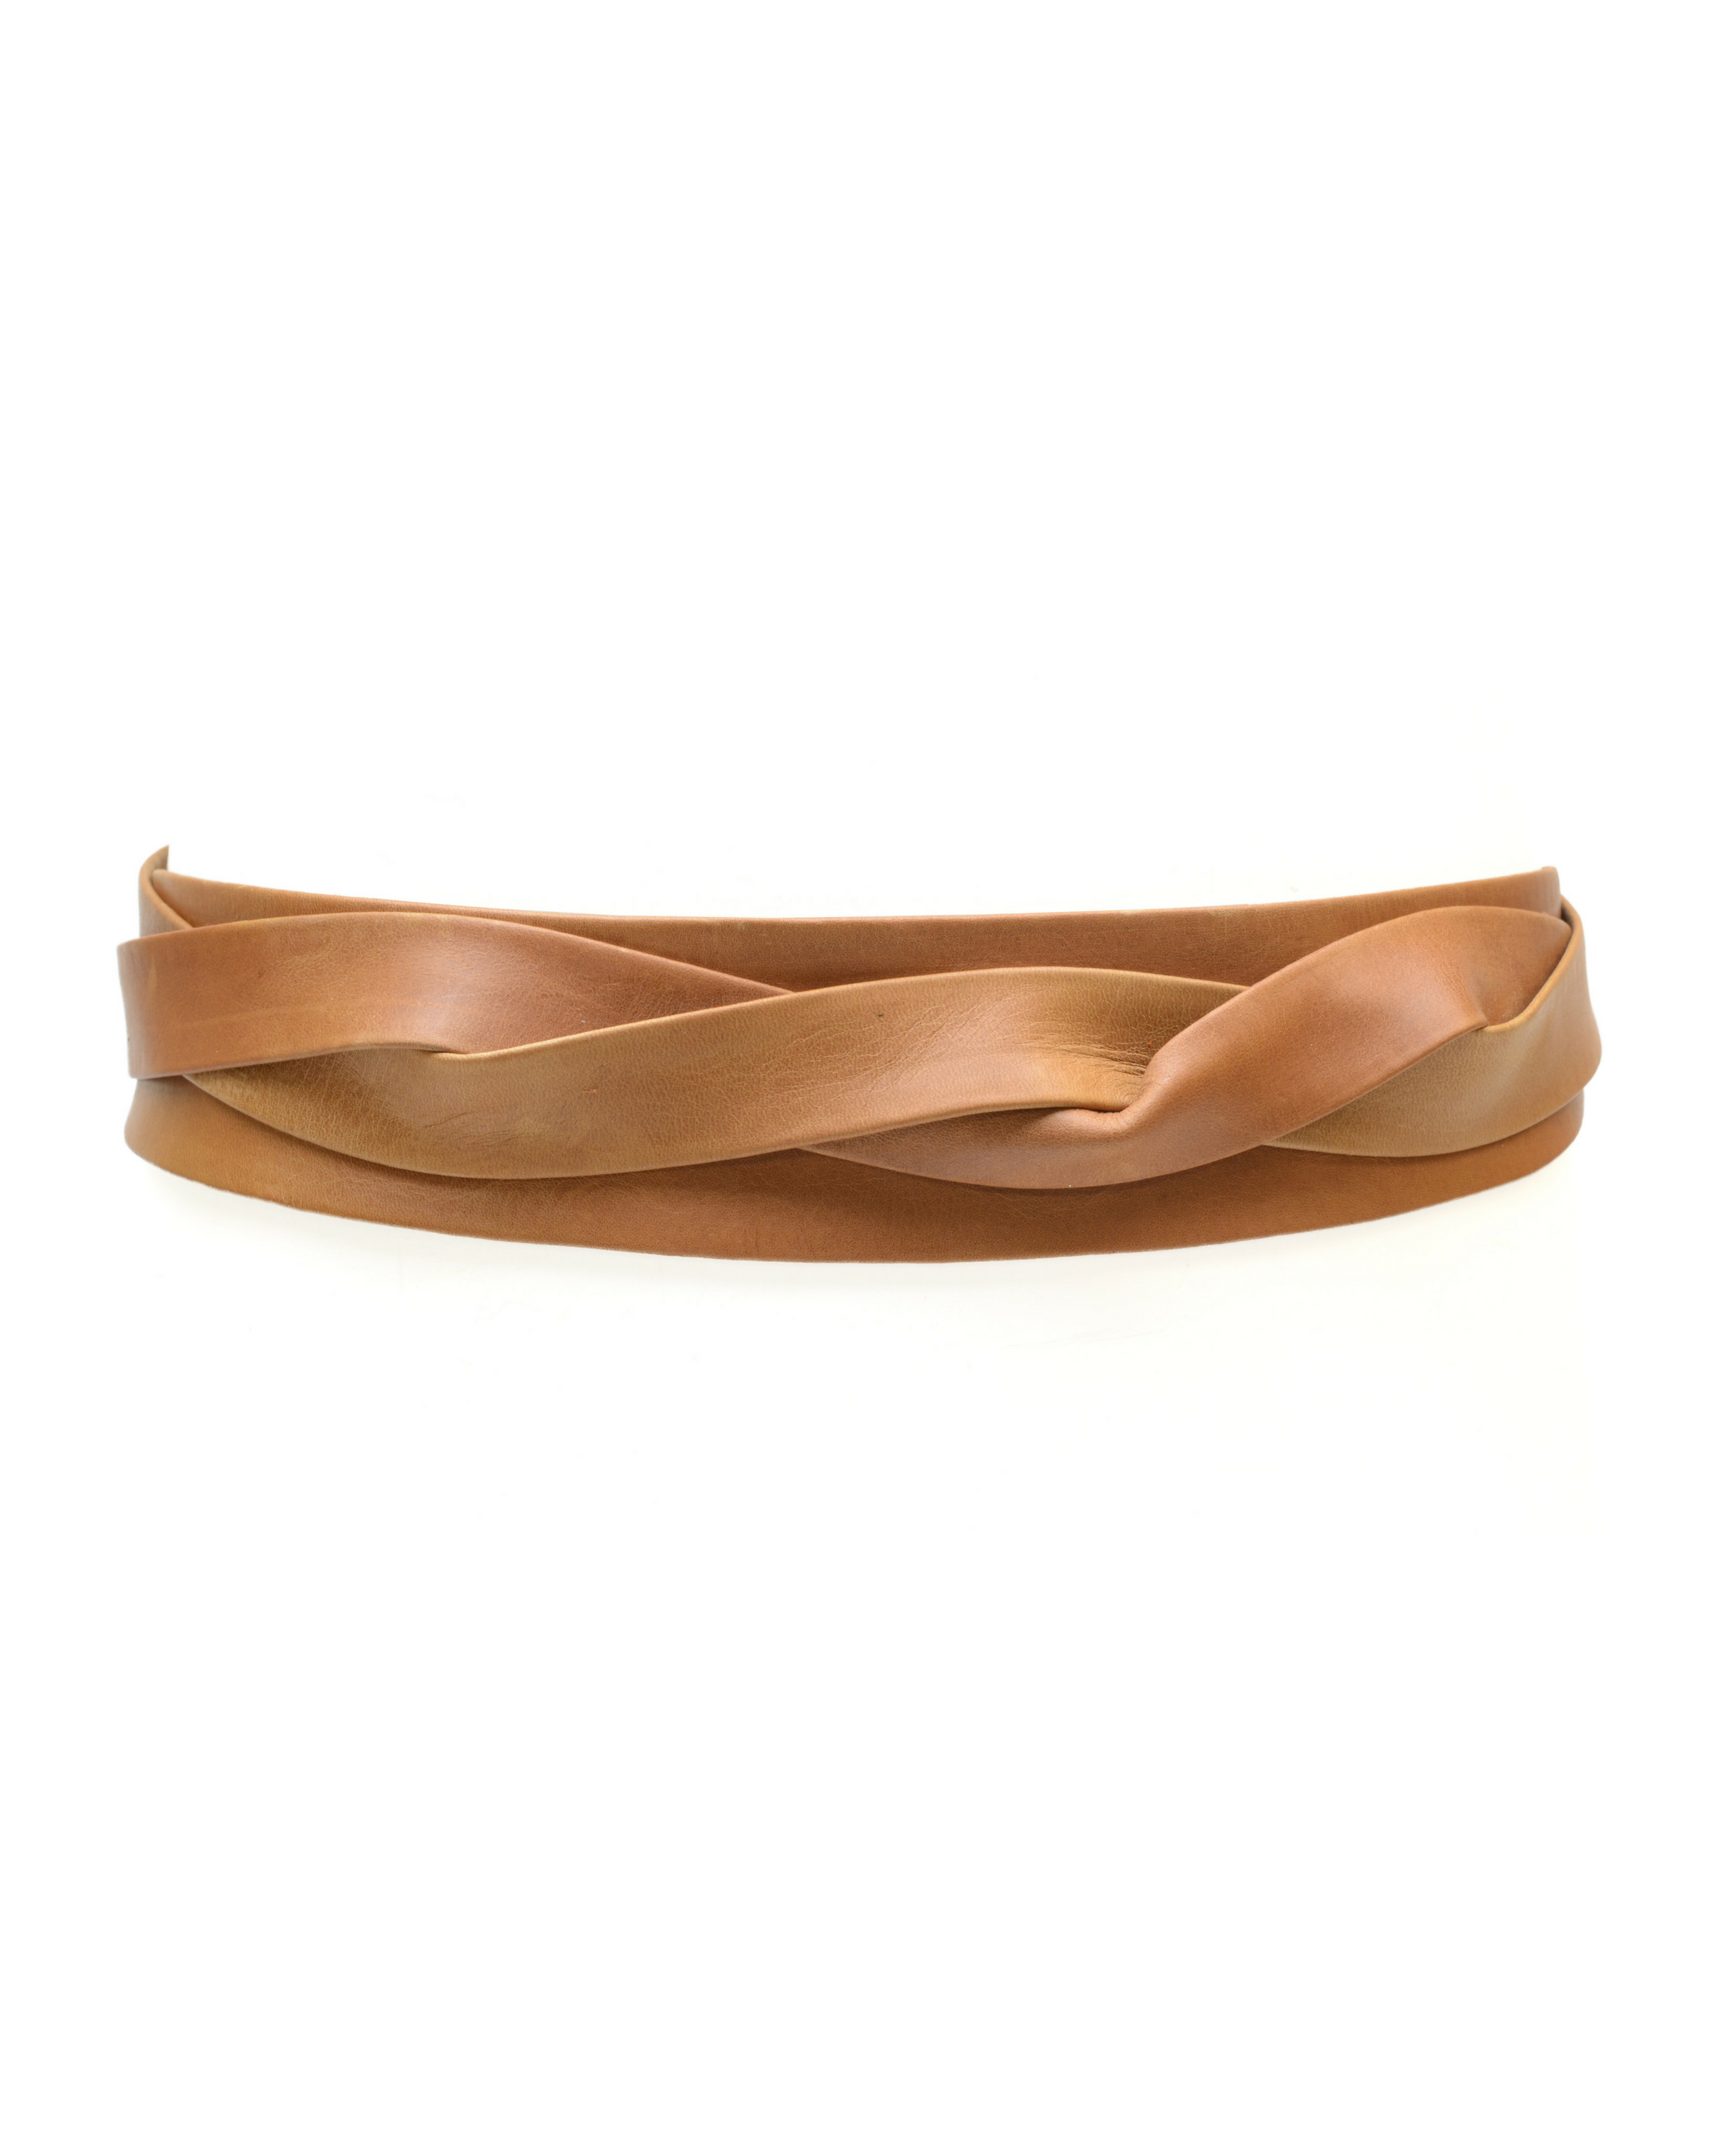 Midi Wrap Belt - Tan - Out of the Blue